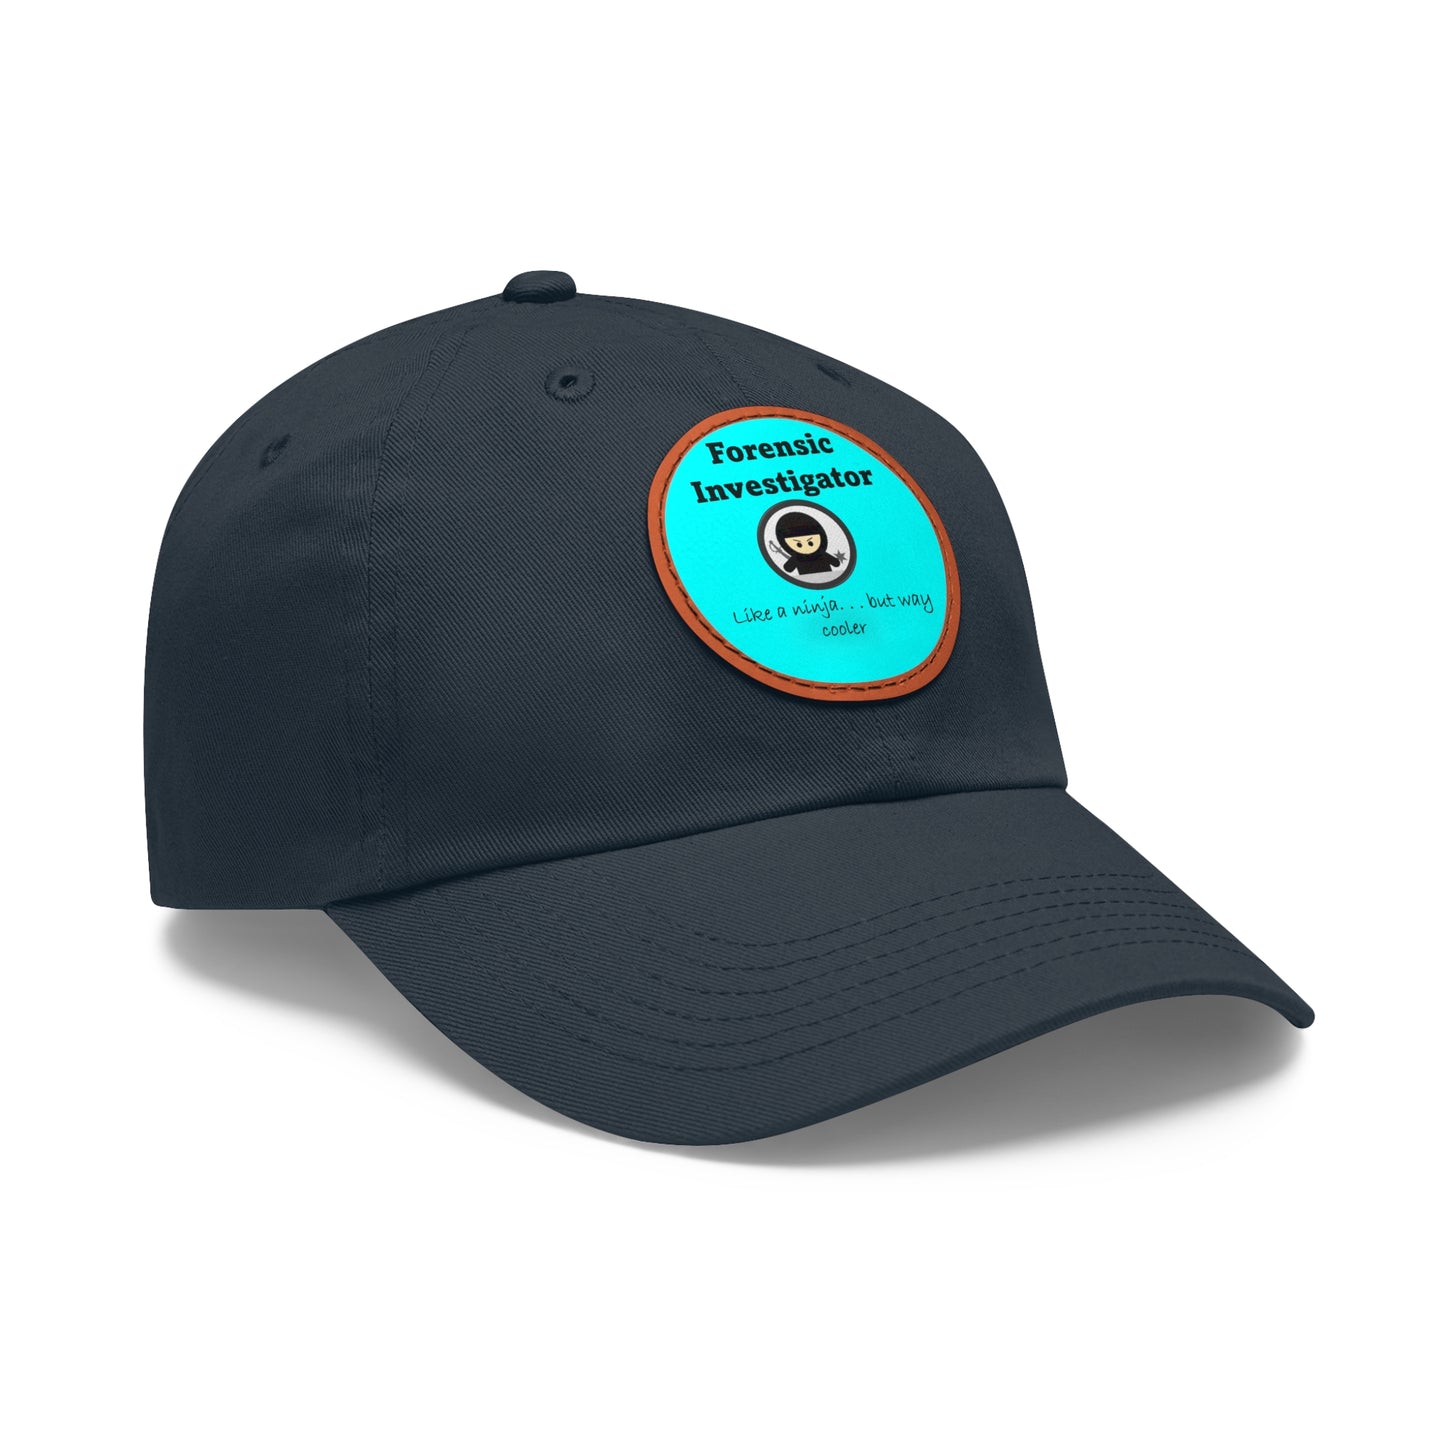 Forensic Investigator Ninja - Bright Teal - Dad Hat with Leather Patch (Round)